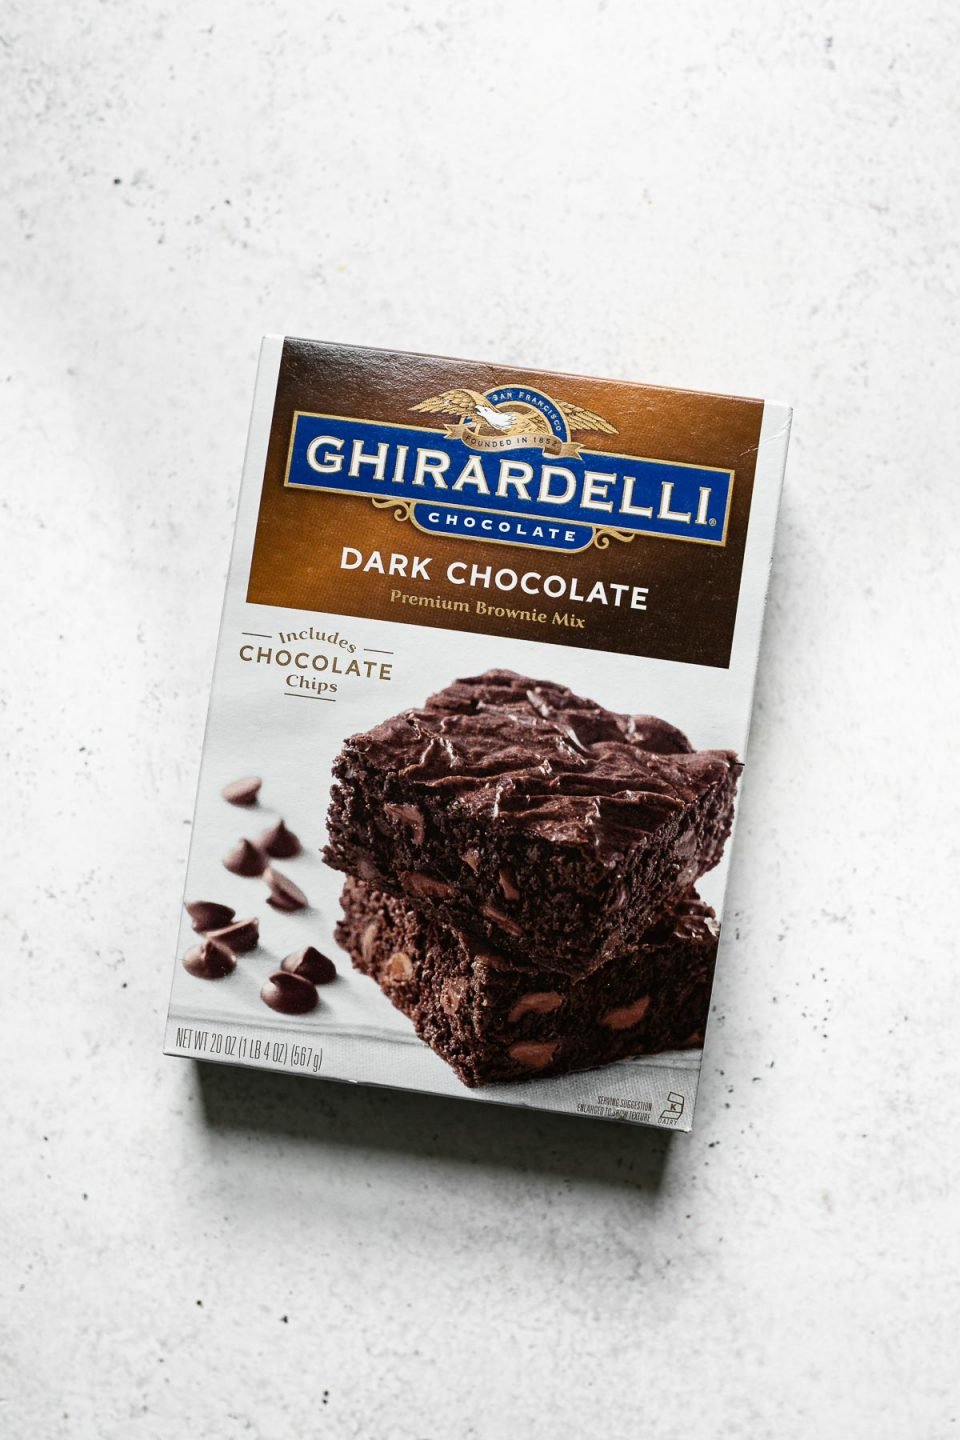 A overhead shot of Ghirardelli Dark Chocolate Premium Brownie Mix which is used in the recipe to make box brownie recipe rests with front of box facing up on a white surface.